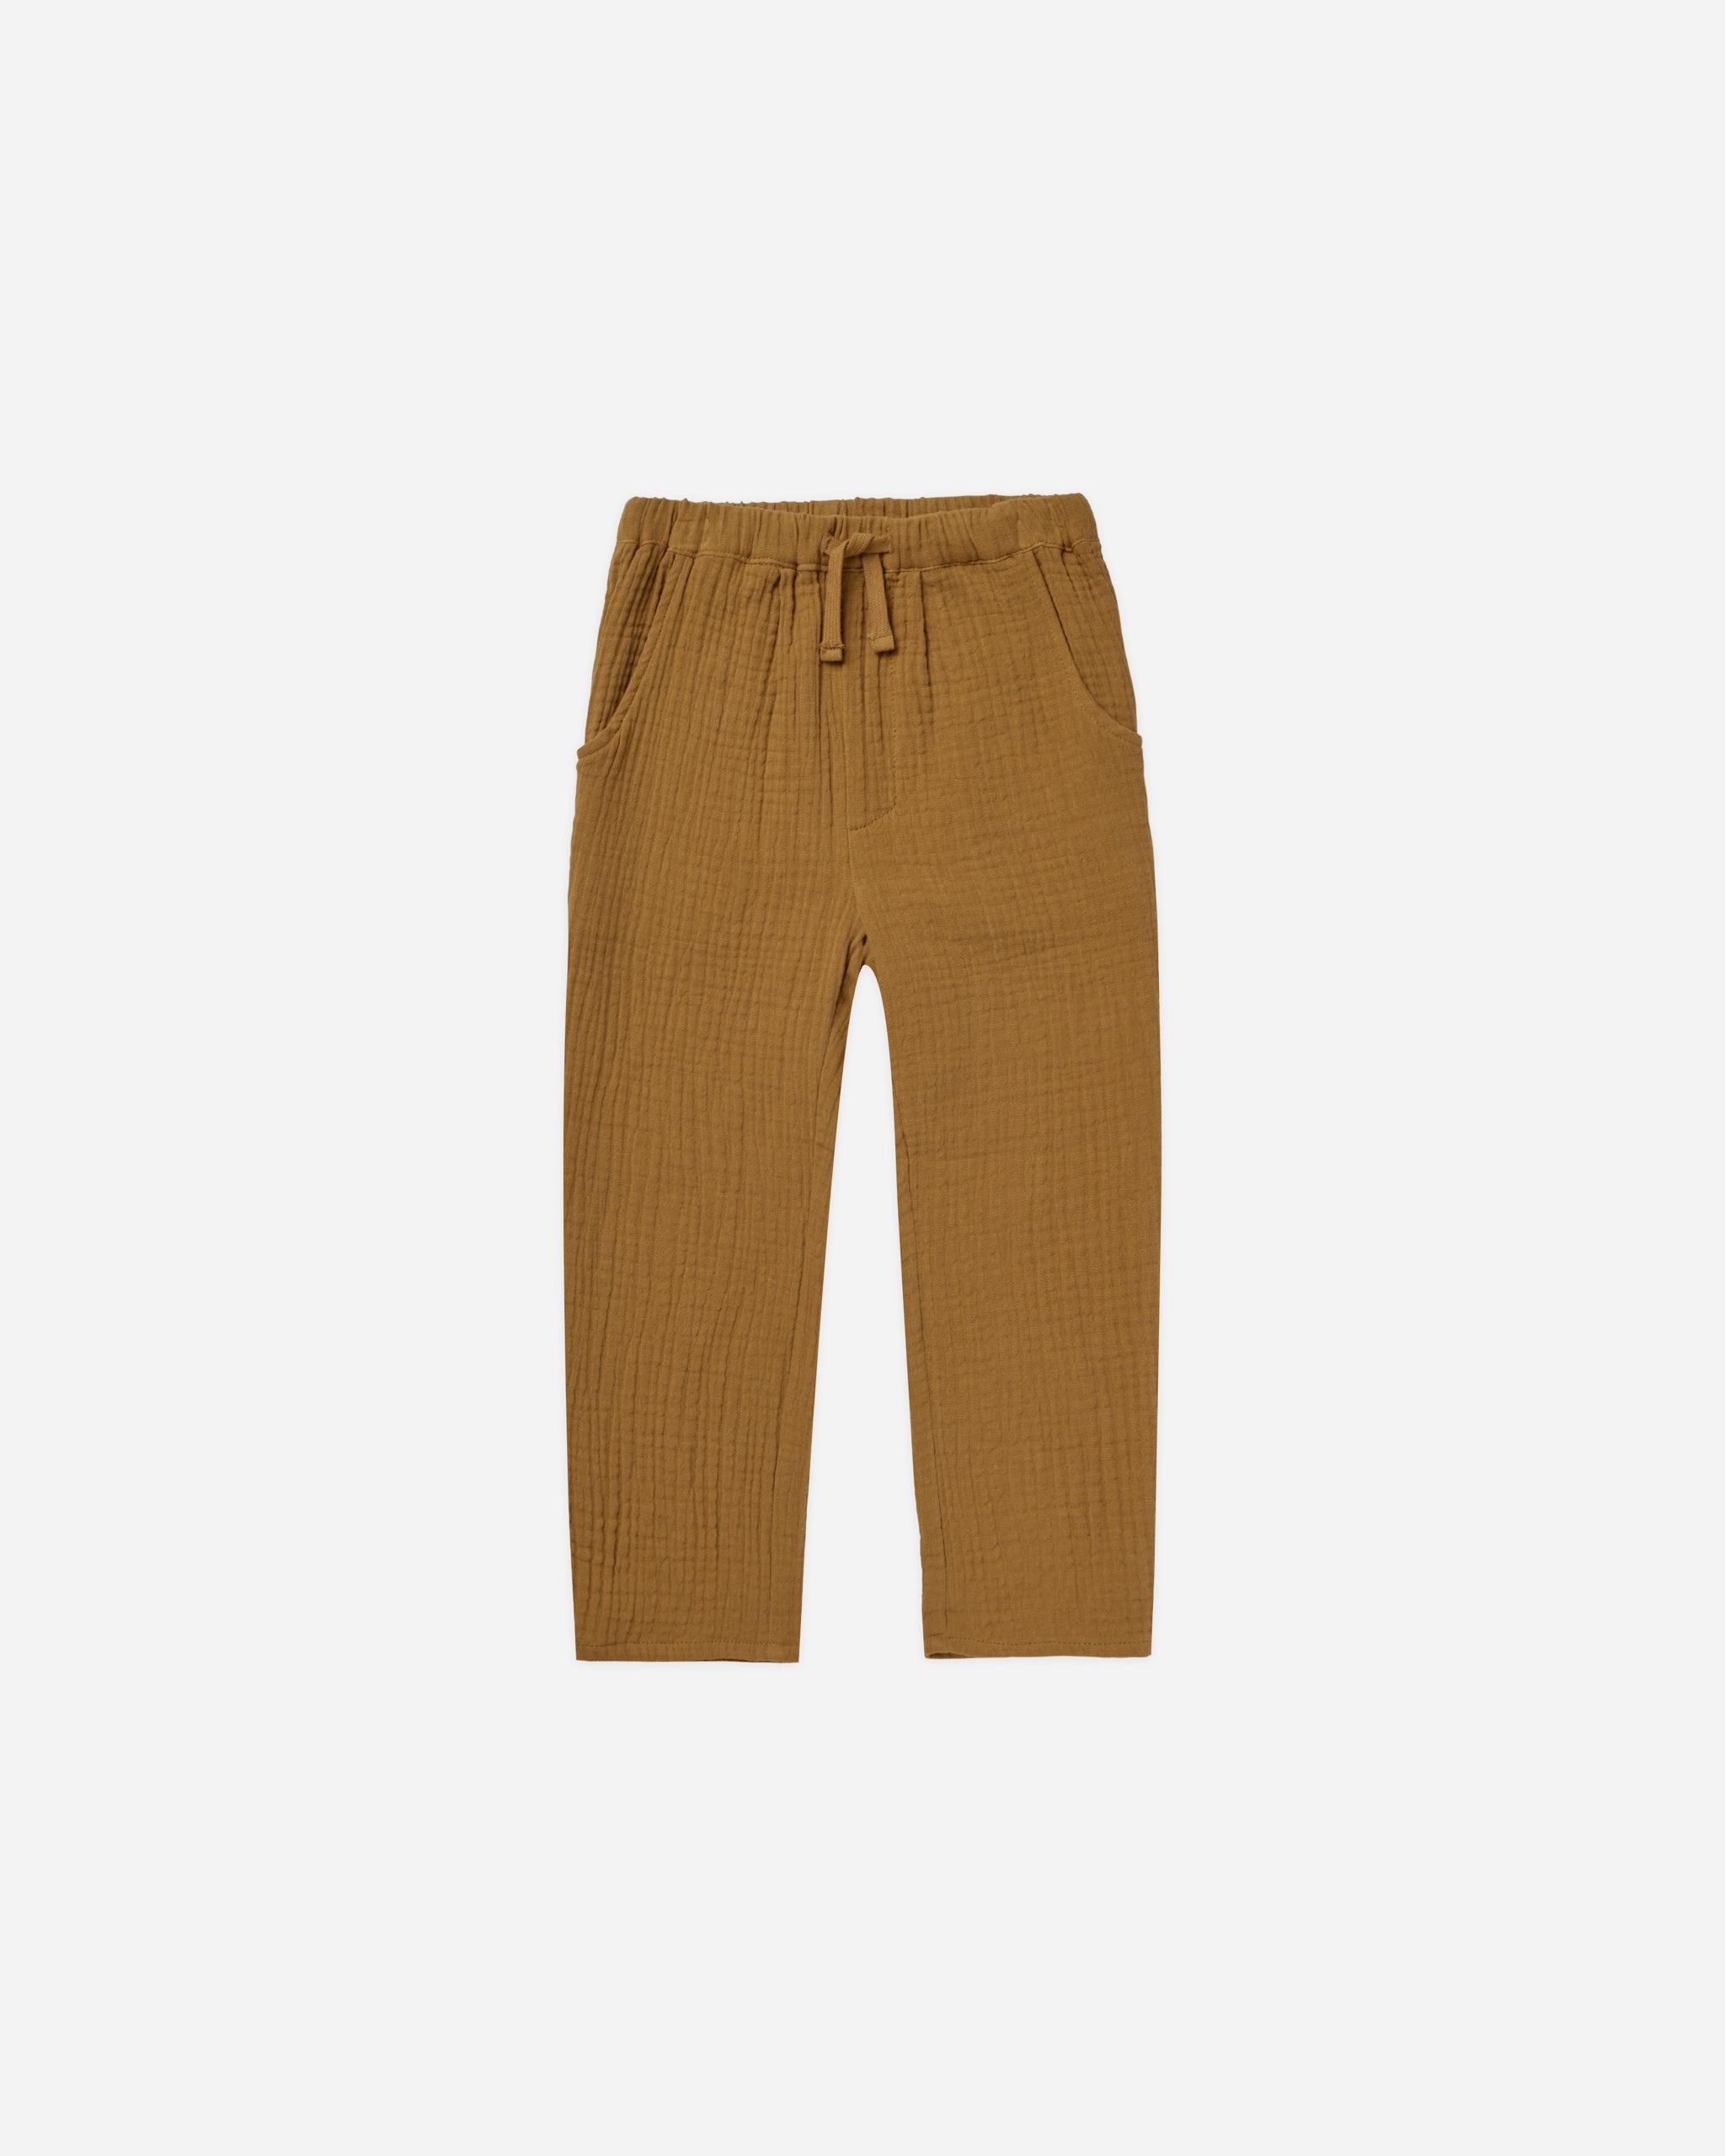 Ethan Trouser || Brass - Rylee + Cru | Kids Clothes | Trendy Baby Clothes | Modern Infant Outfits |